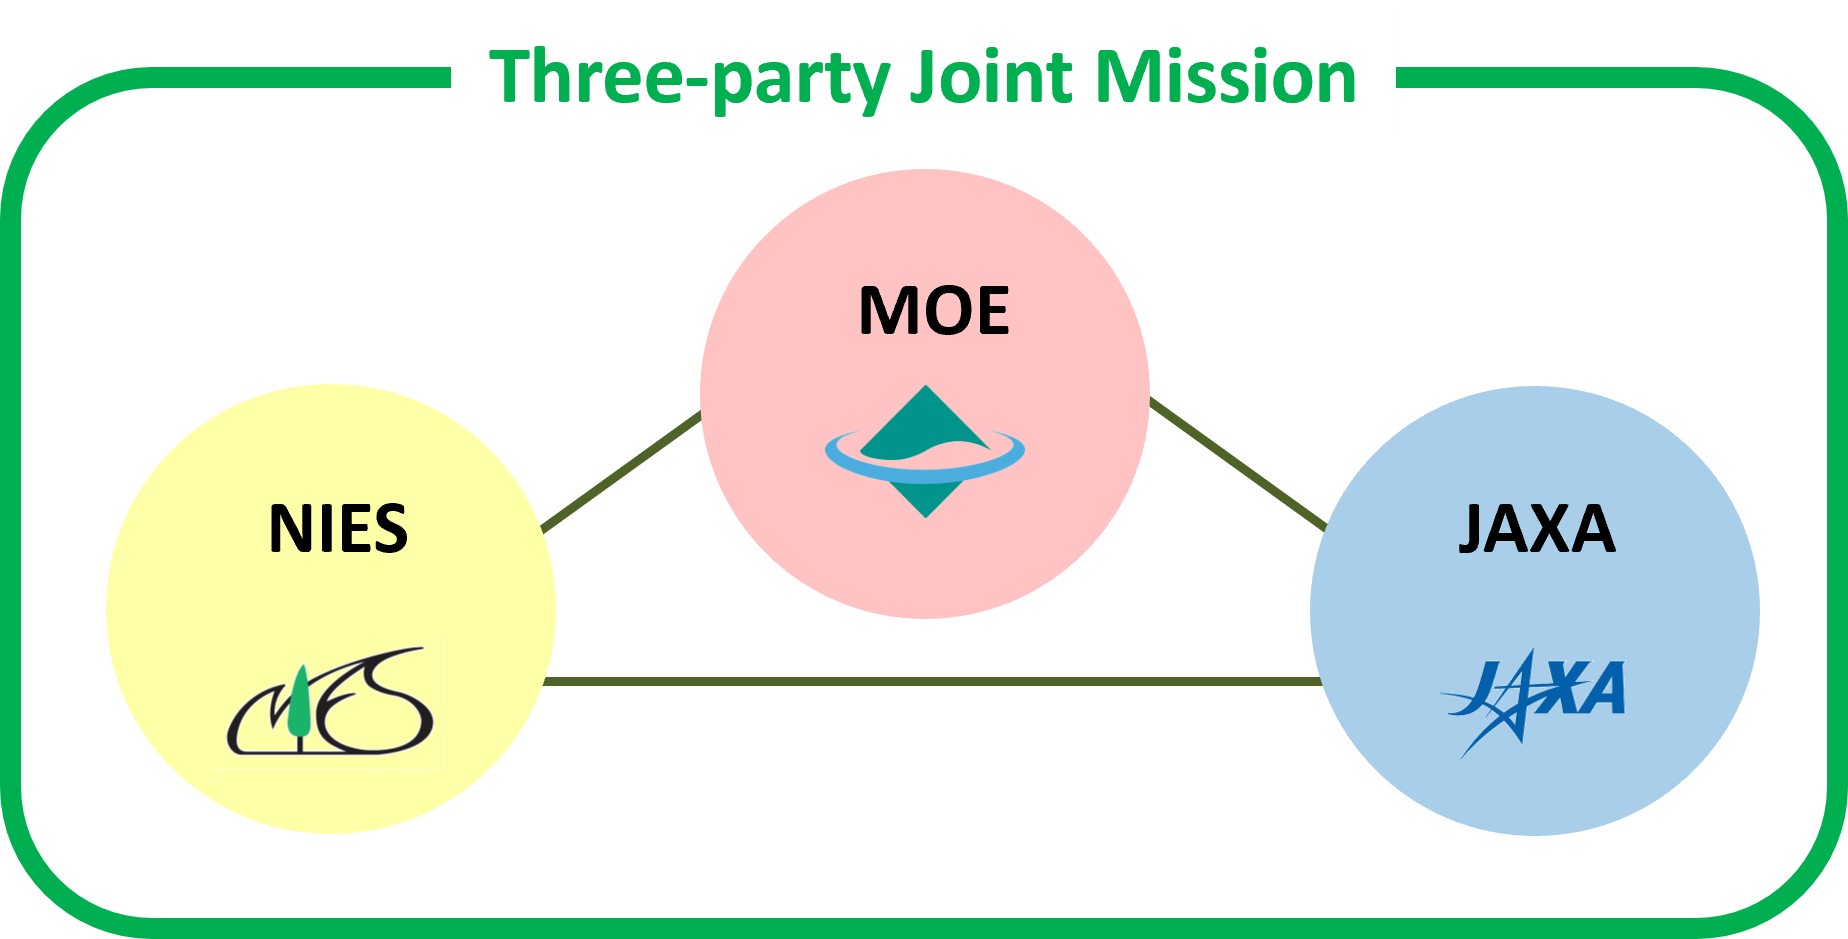 Three-party Joint Mission